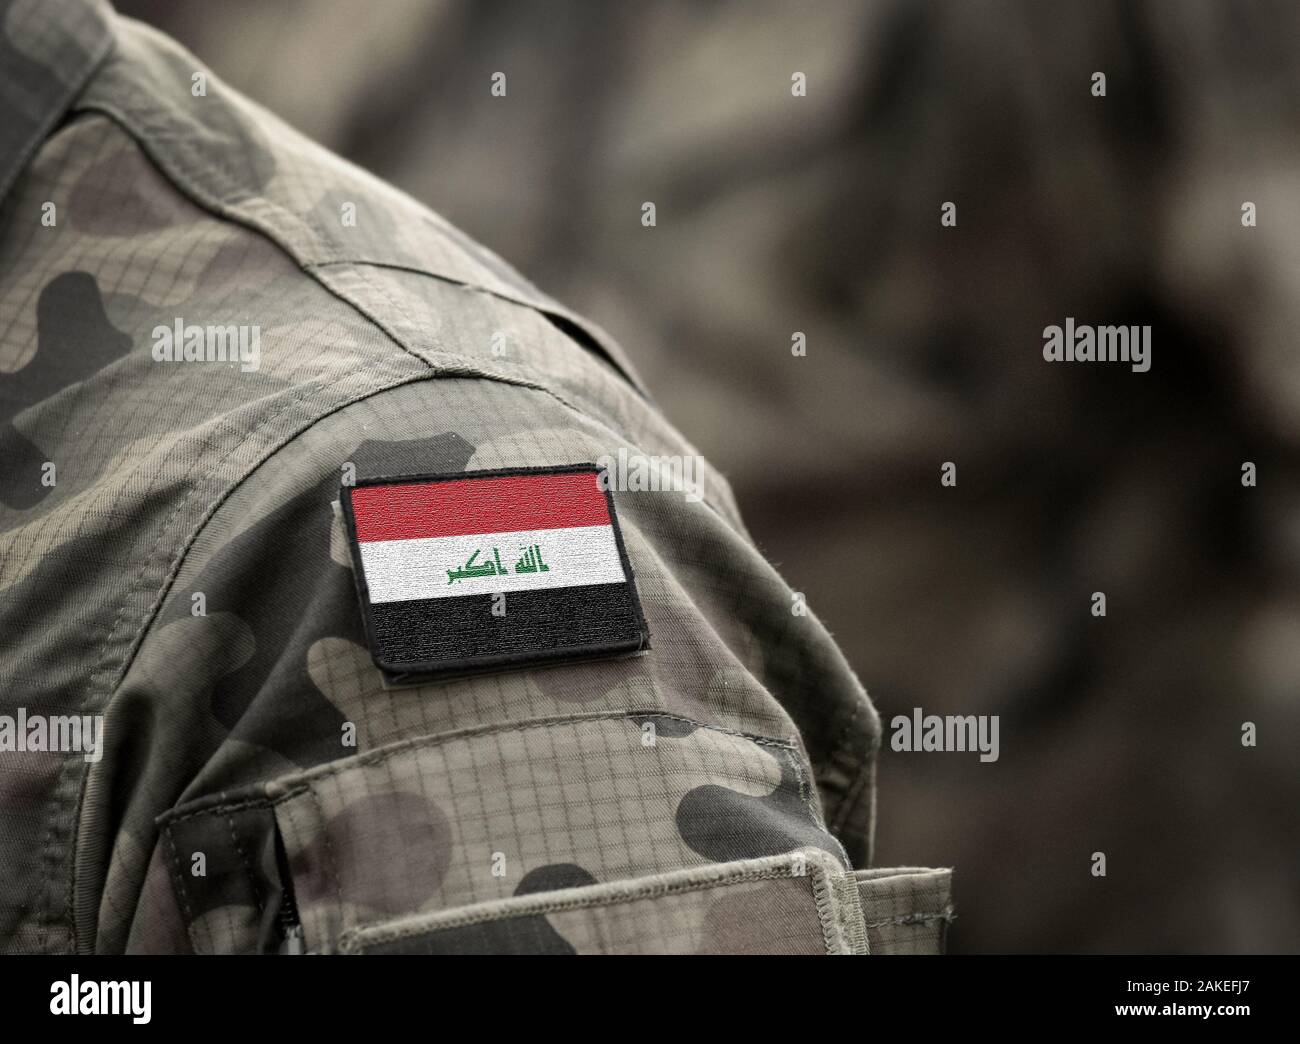 Flag of Iraq on military uniform. Republic of Iraq. Army, armed forces, soldiers. Collage. Stock Photo